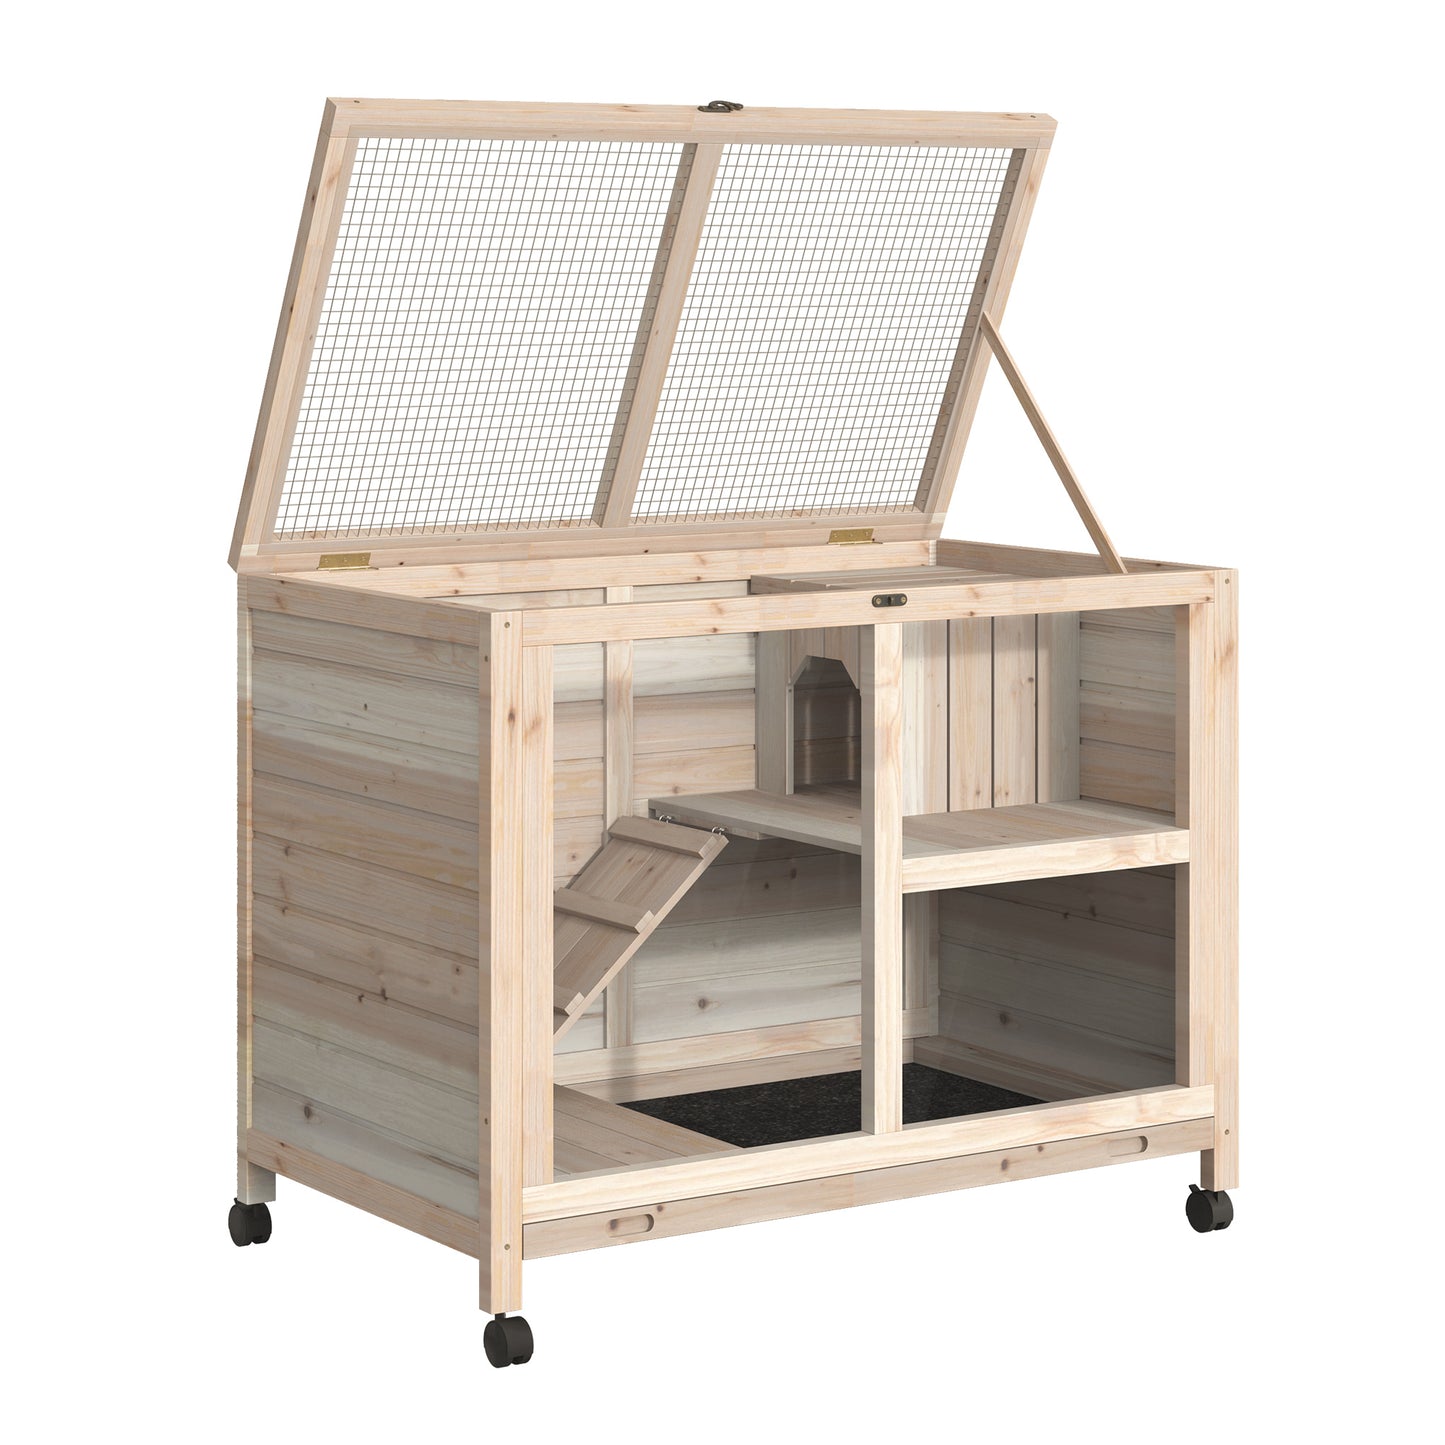 Wooden Rabbit Hutch, Guinea Pigs House, Guinea Pig Cage W/ Pull-out Tray Openable Roof Wheels 91.5 x 53.3 x 73 cm, Pawhut, 9